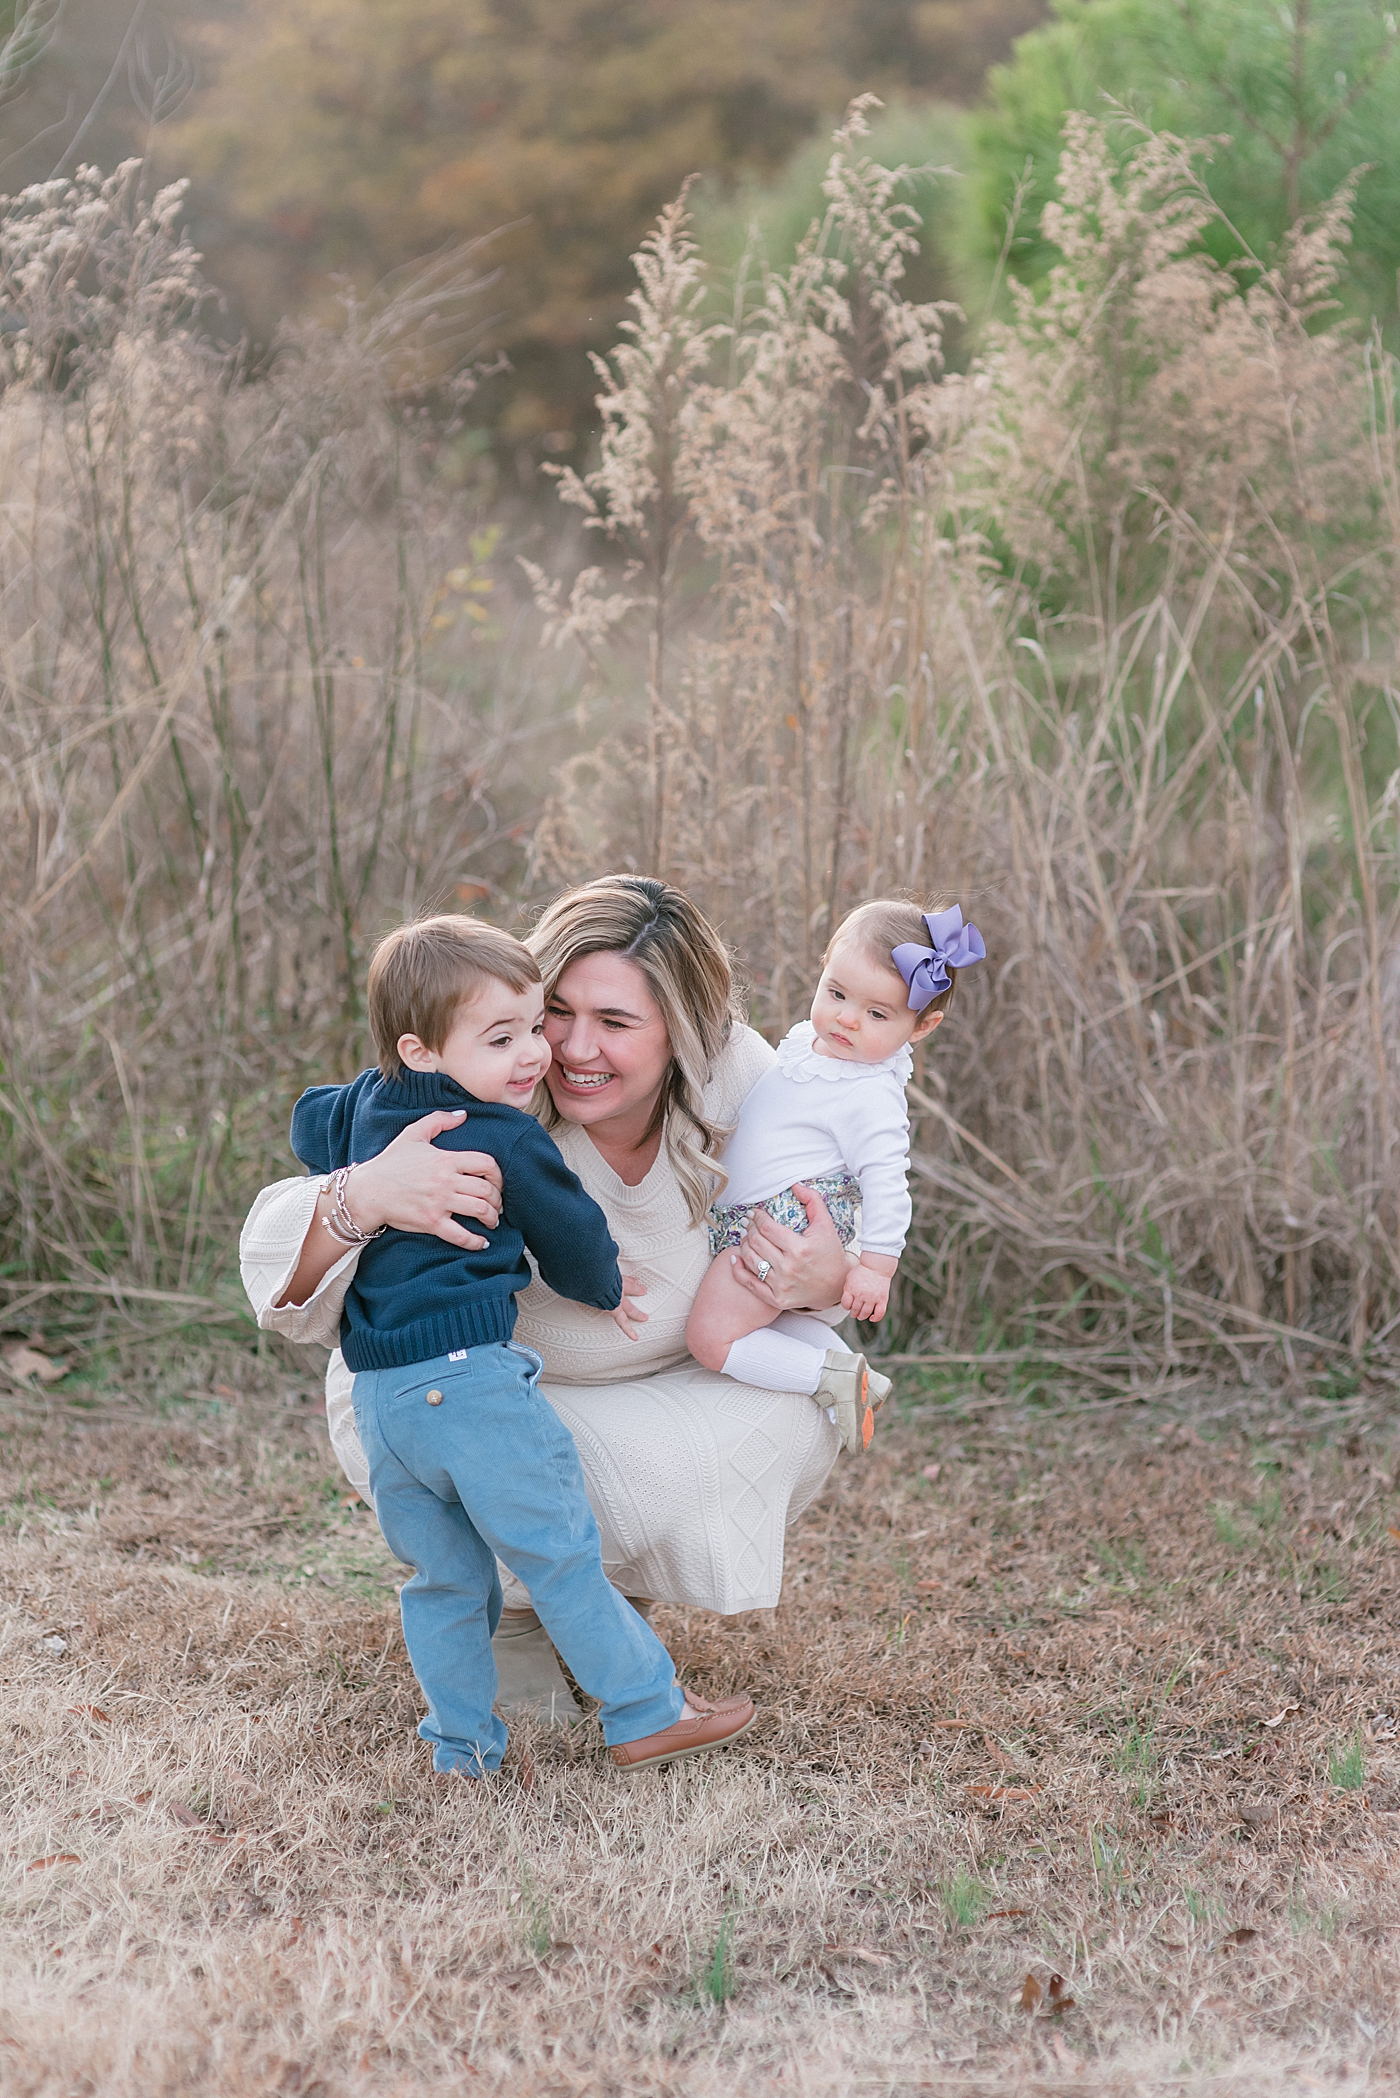 Mom snuggling with her little ones during Milestone Session at Marvin Efird Park | Photo by Anna Wisjo Photography 